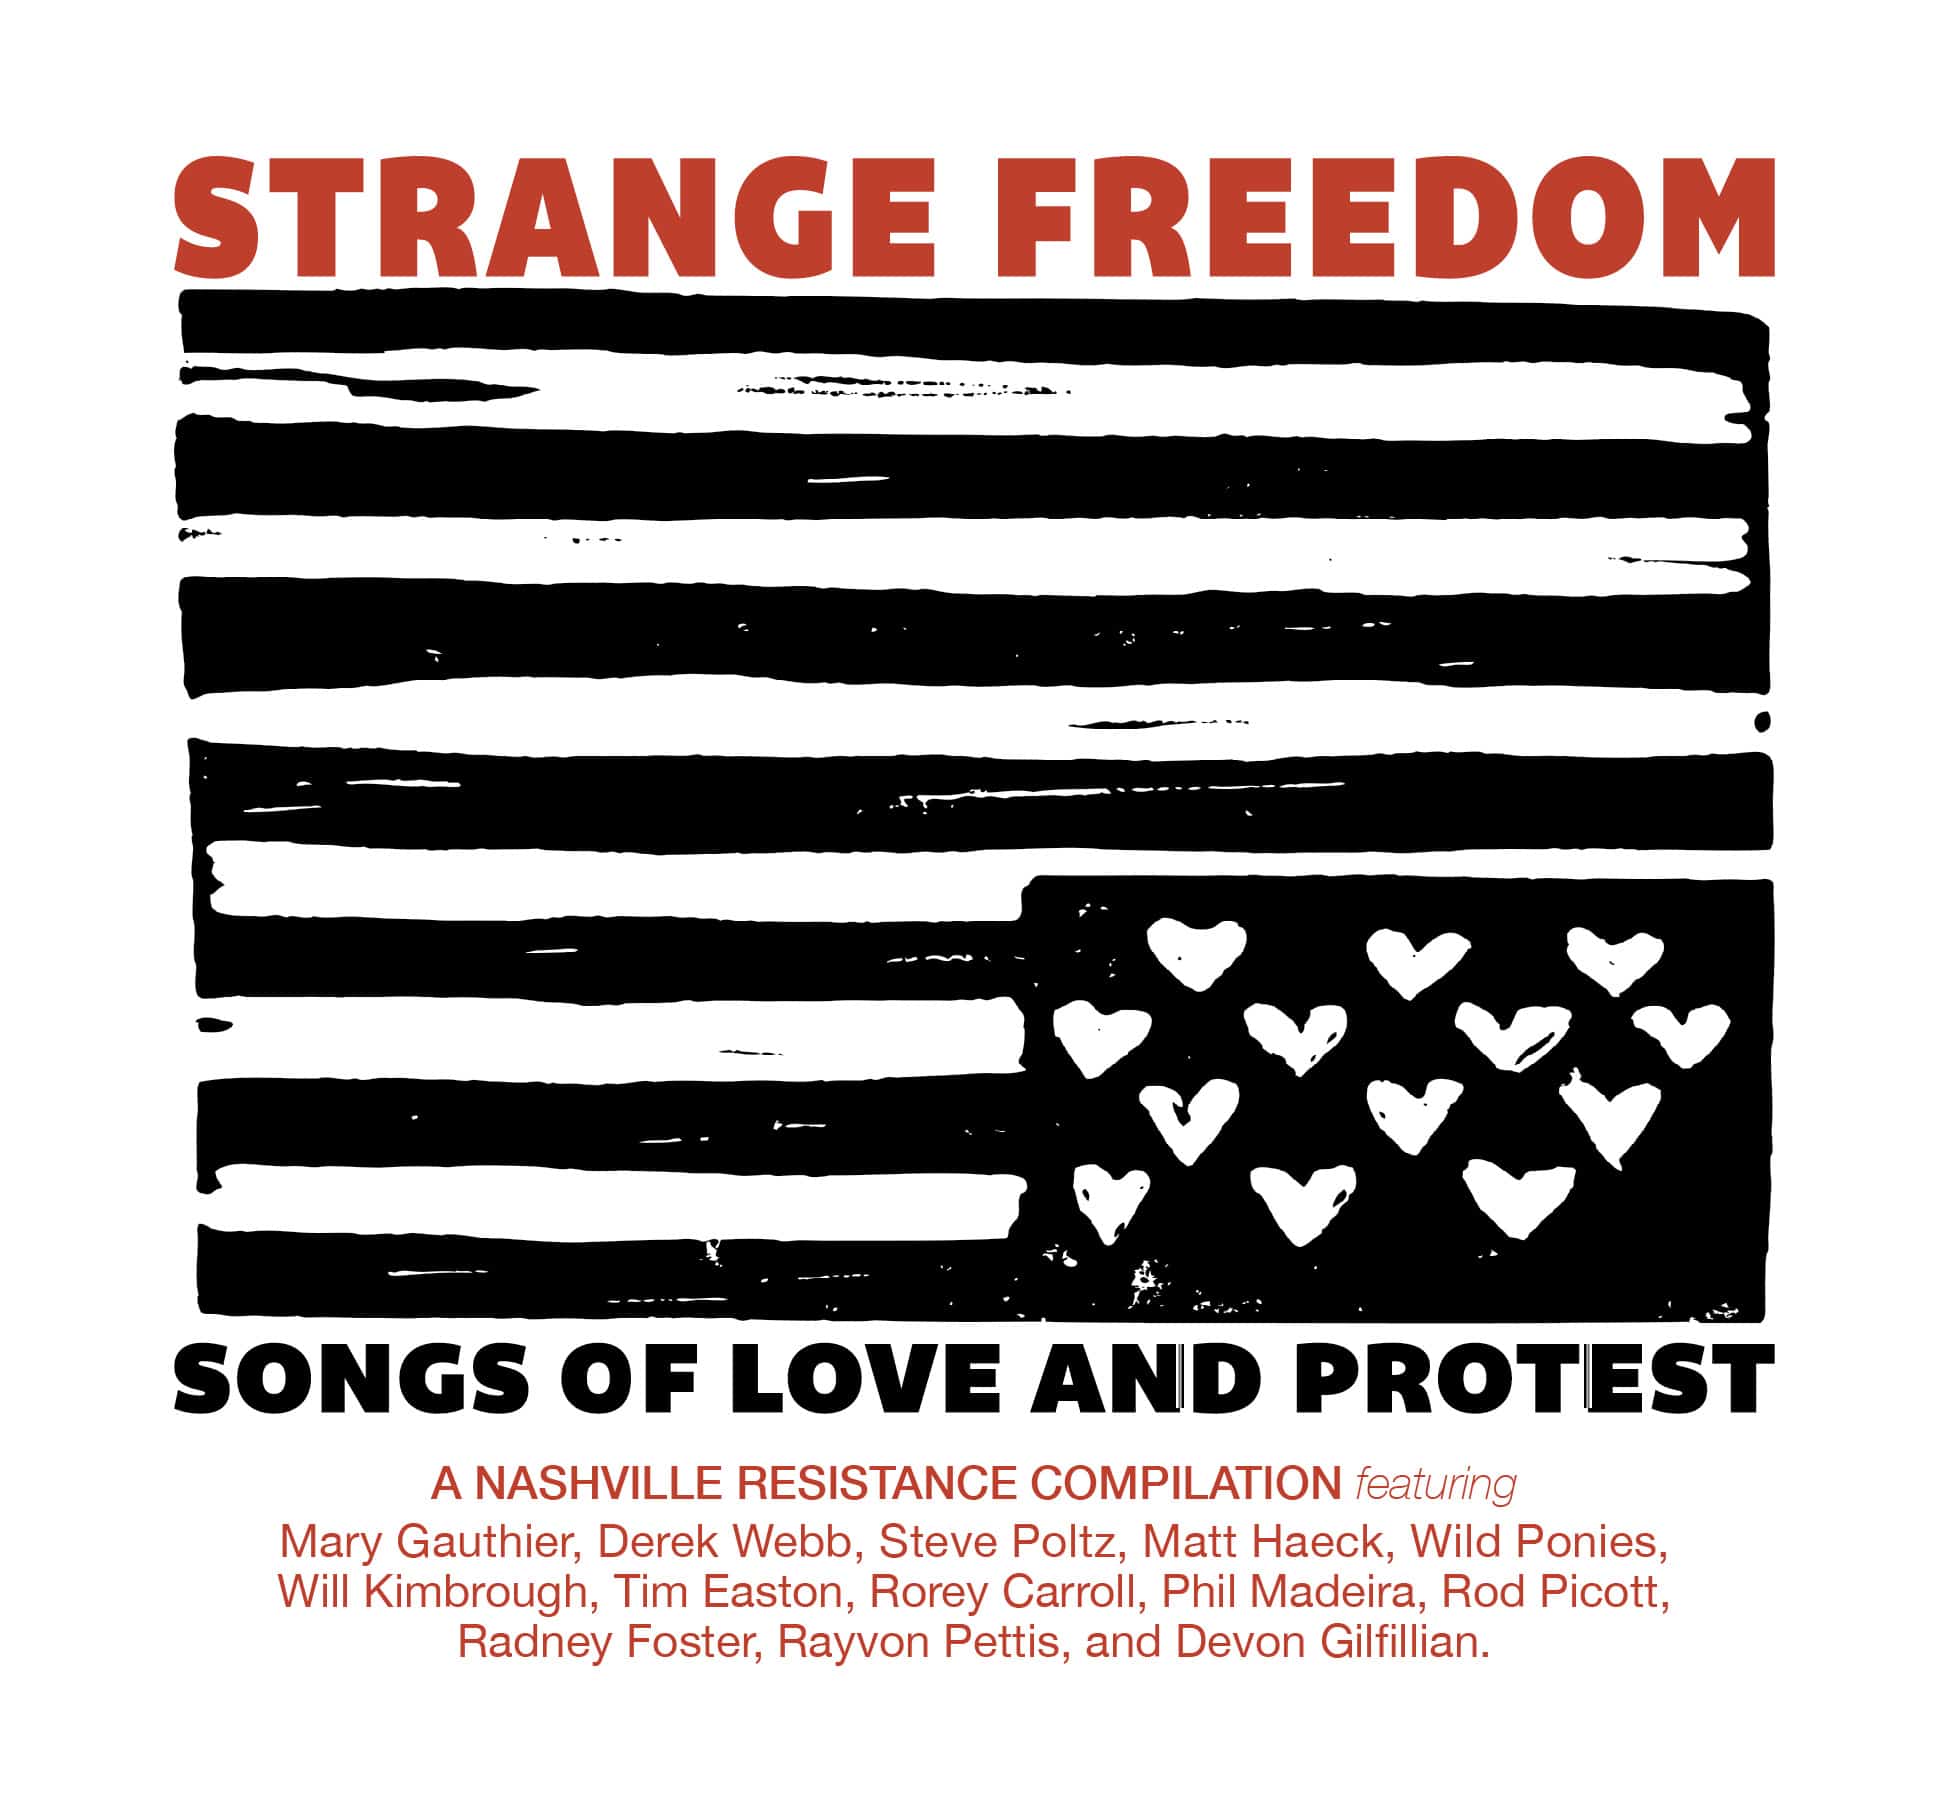 Mary Gauthier, Radney Foster Part of New Strange Freedom Compilation